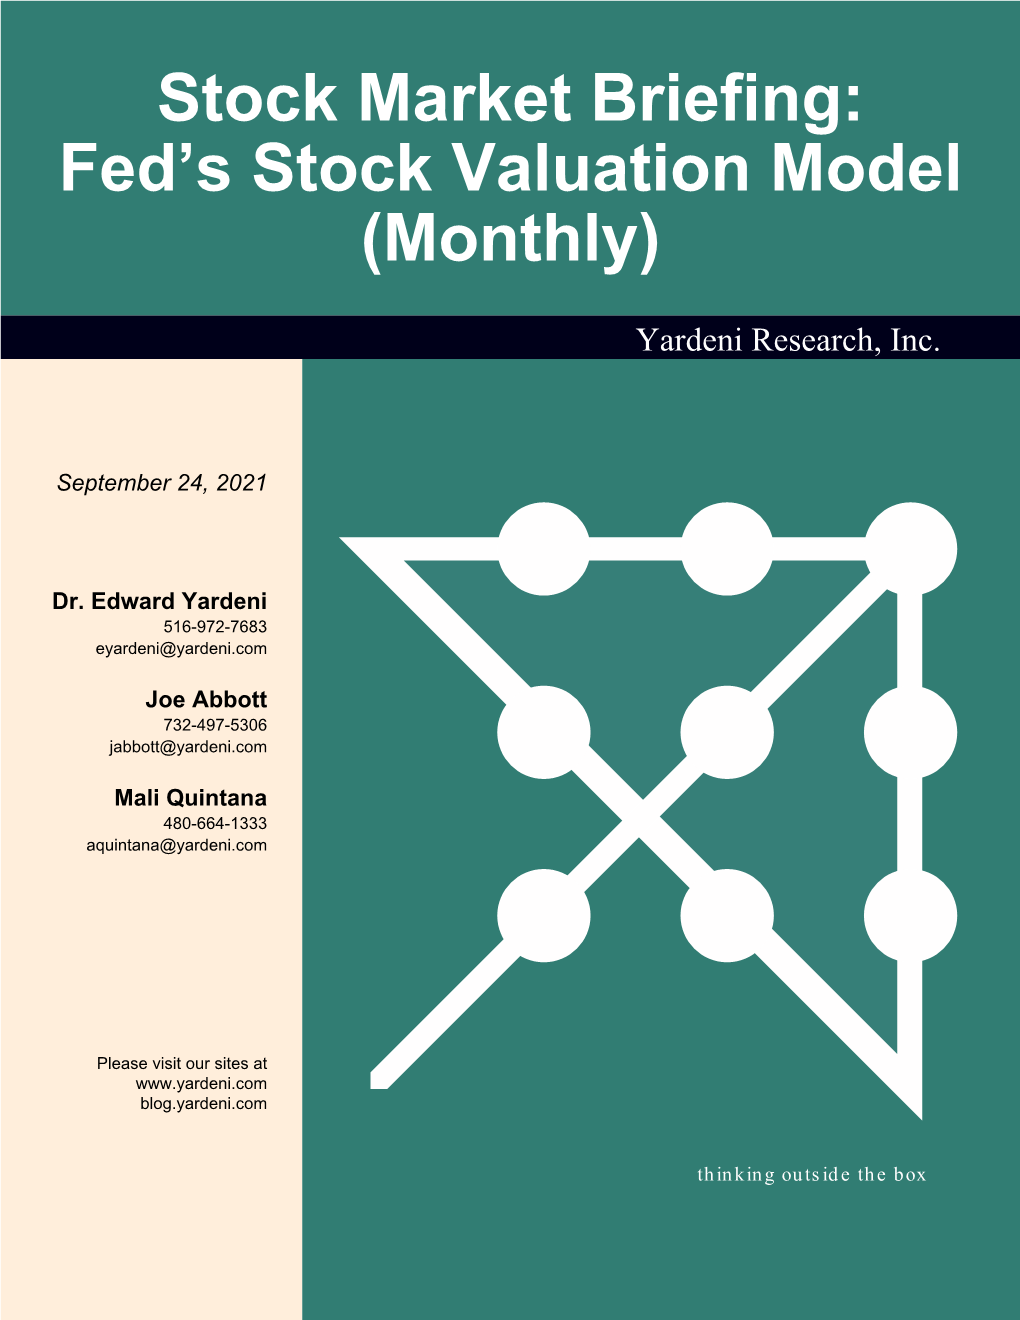 Fed's Stock Valuation Model (Monthly)